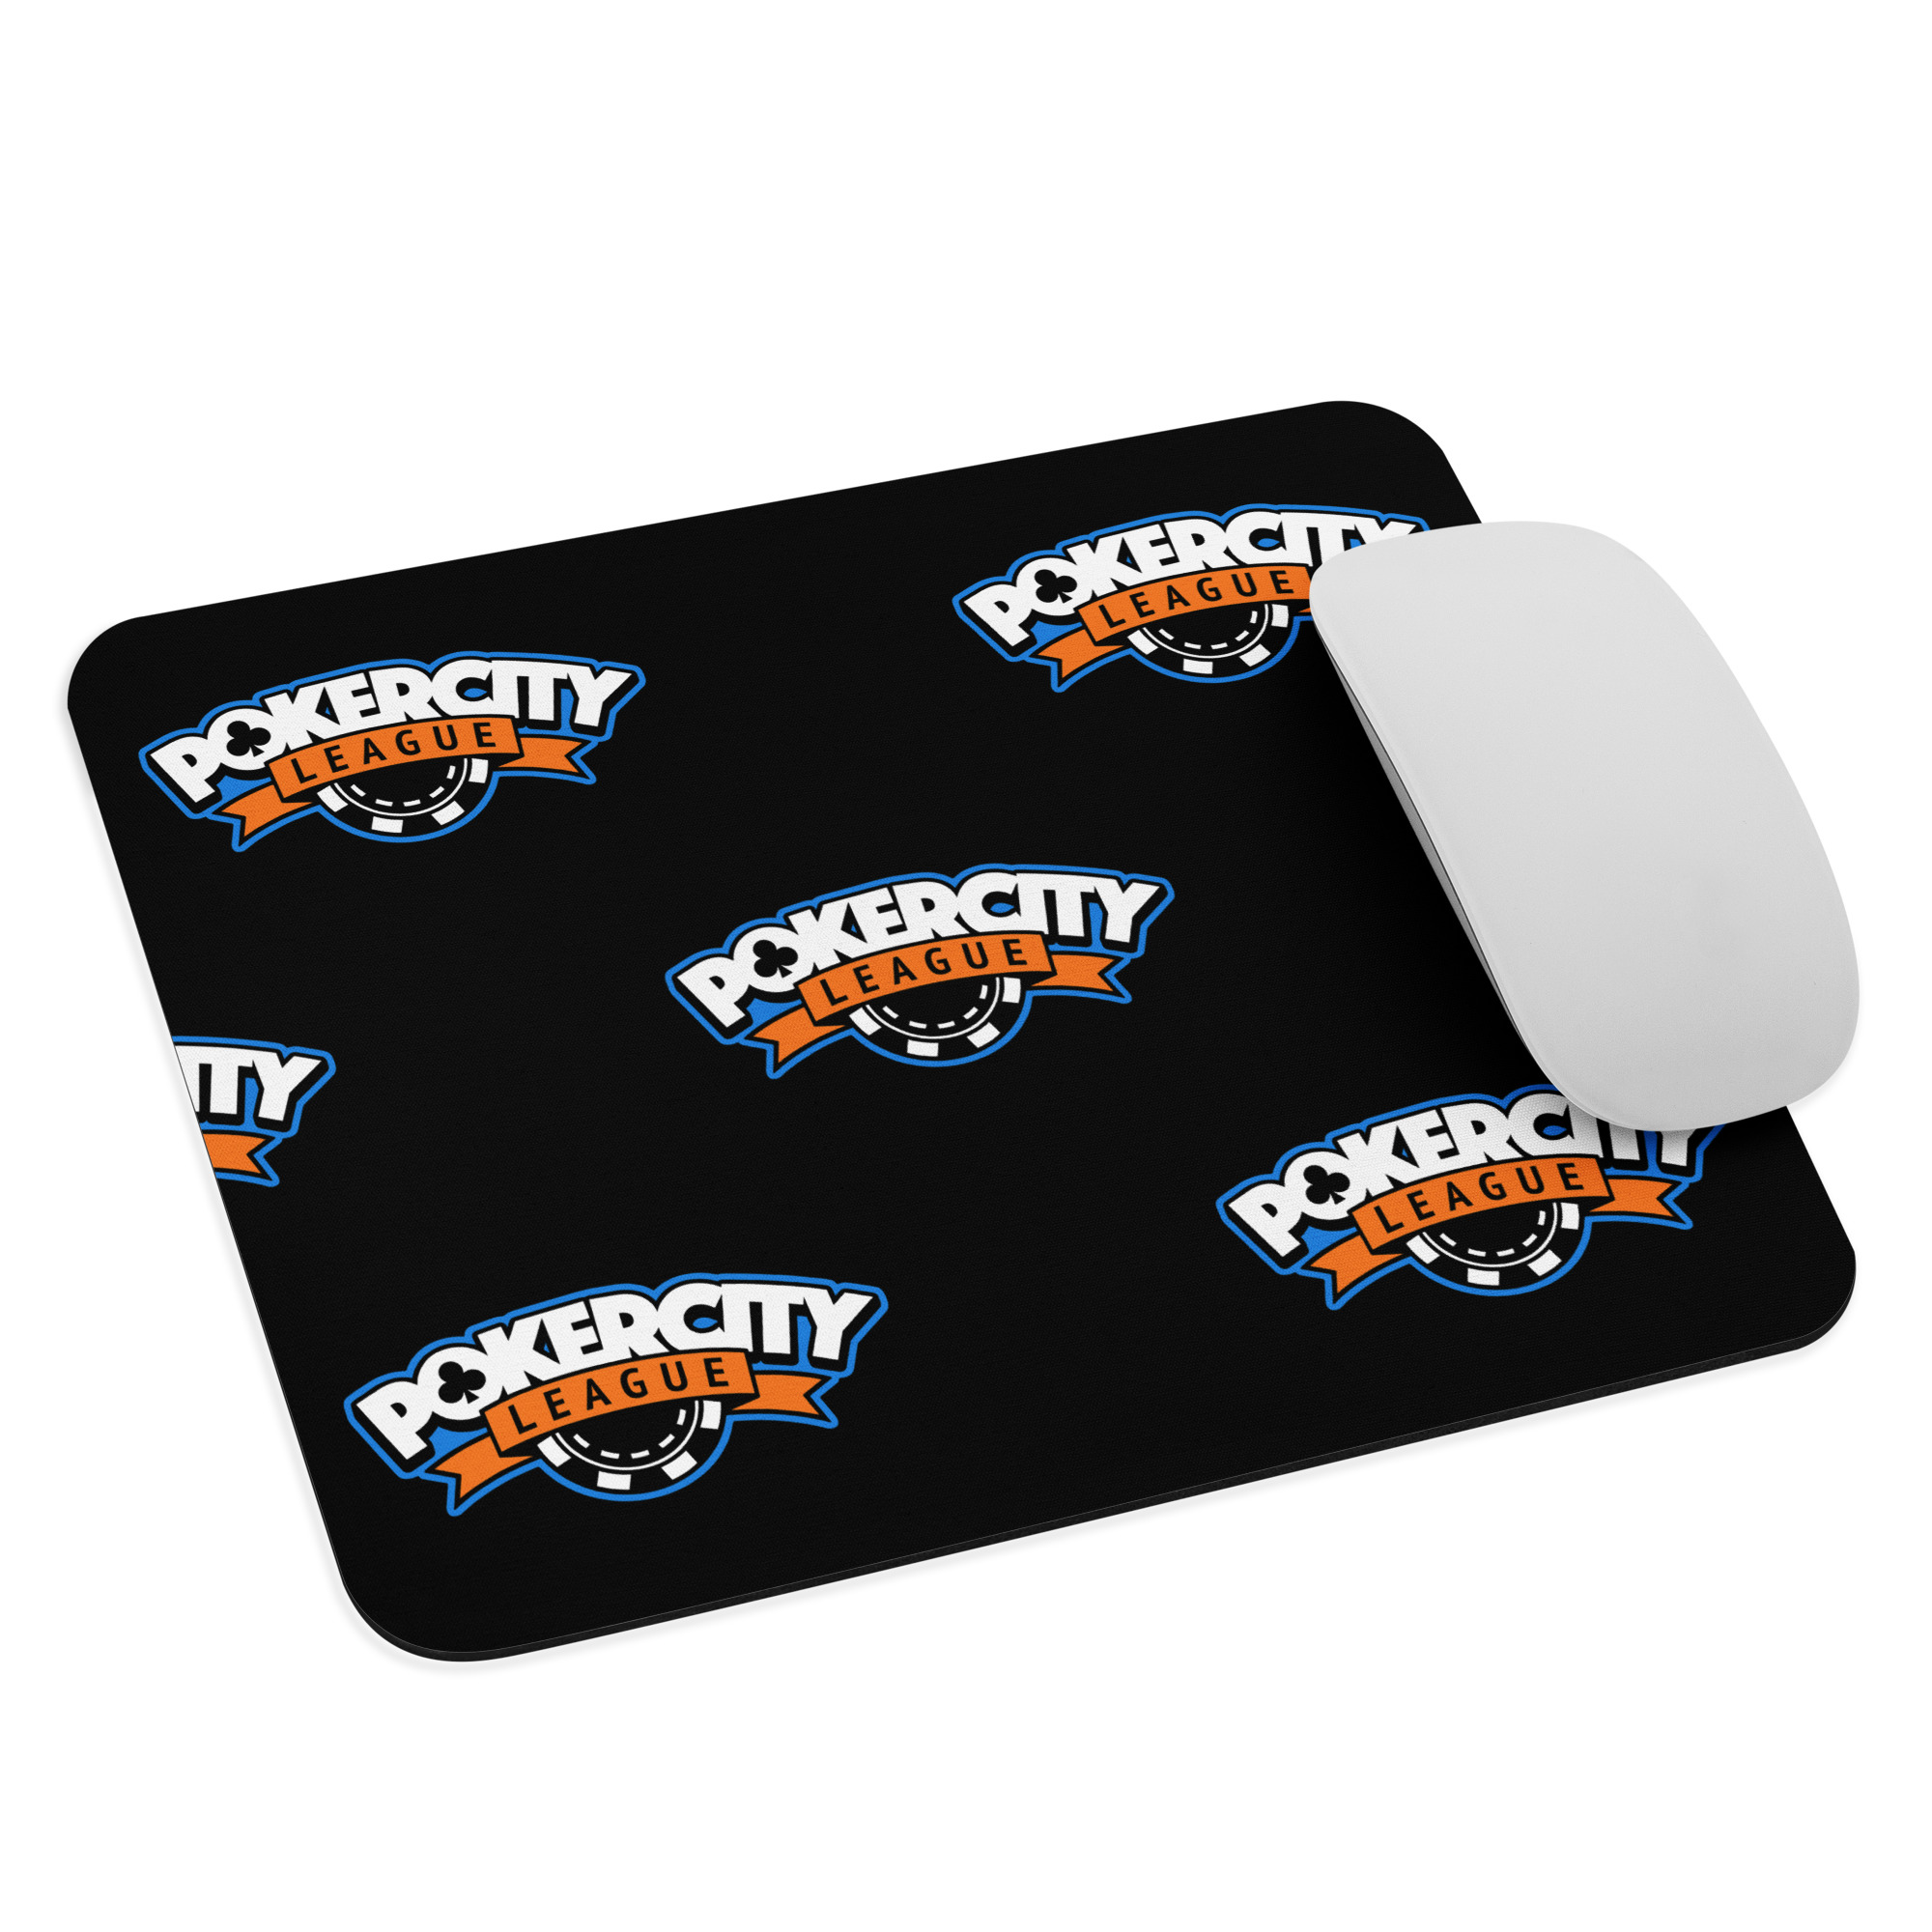 mouse-pad-white-front-65436538e6ca2.jpg